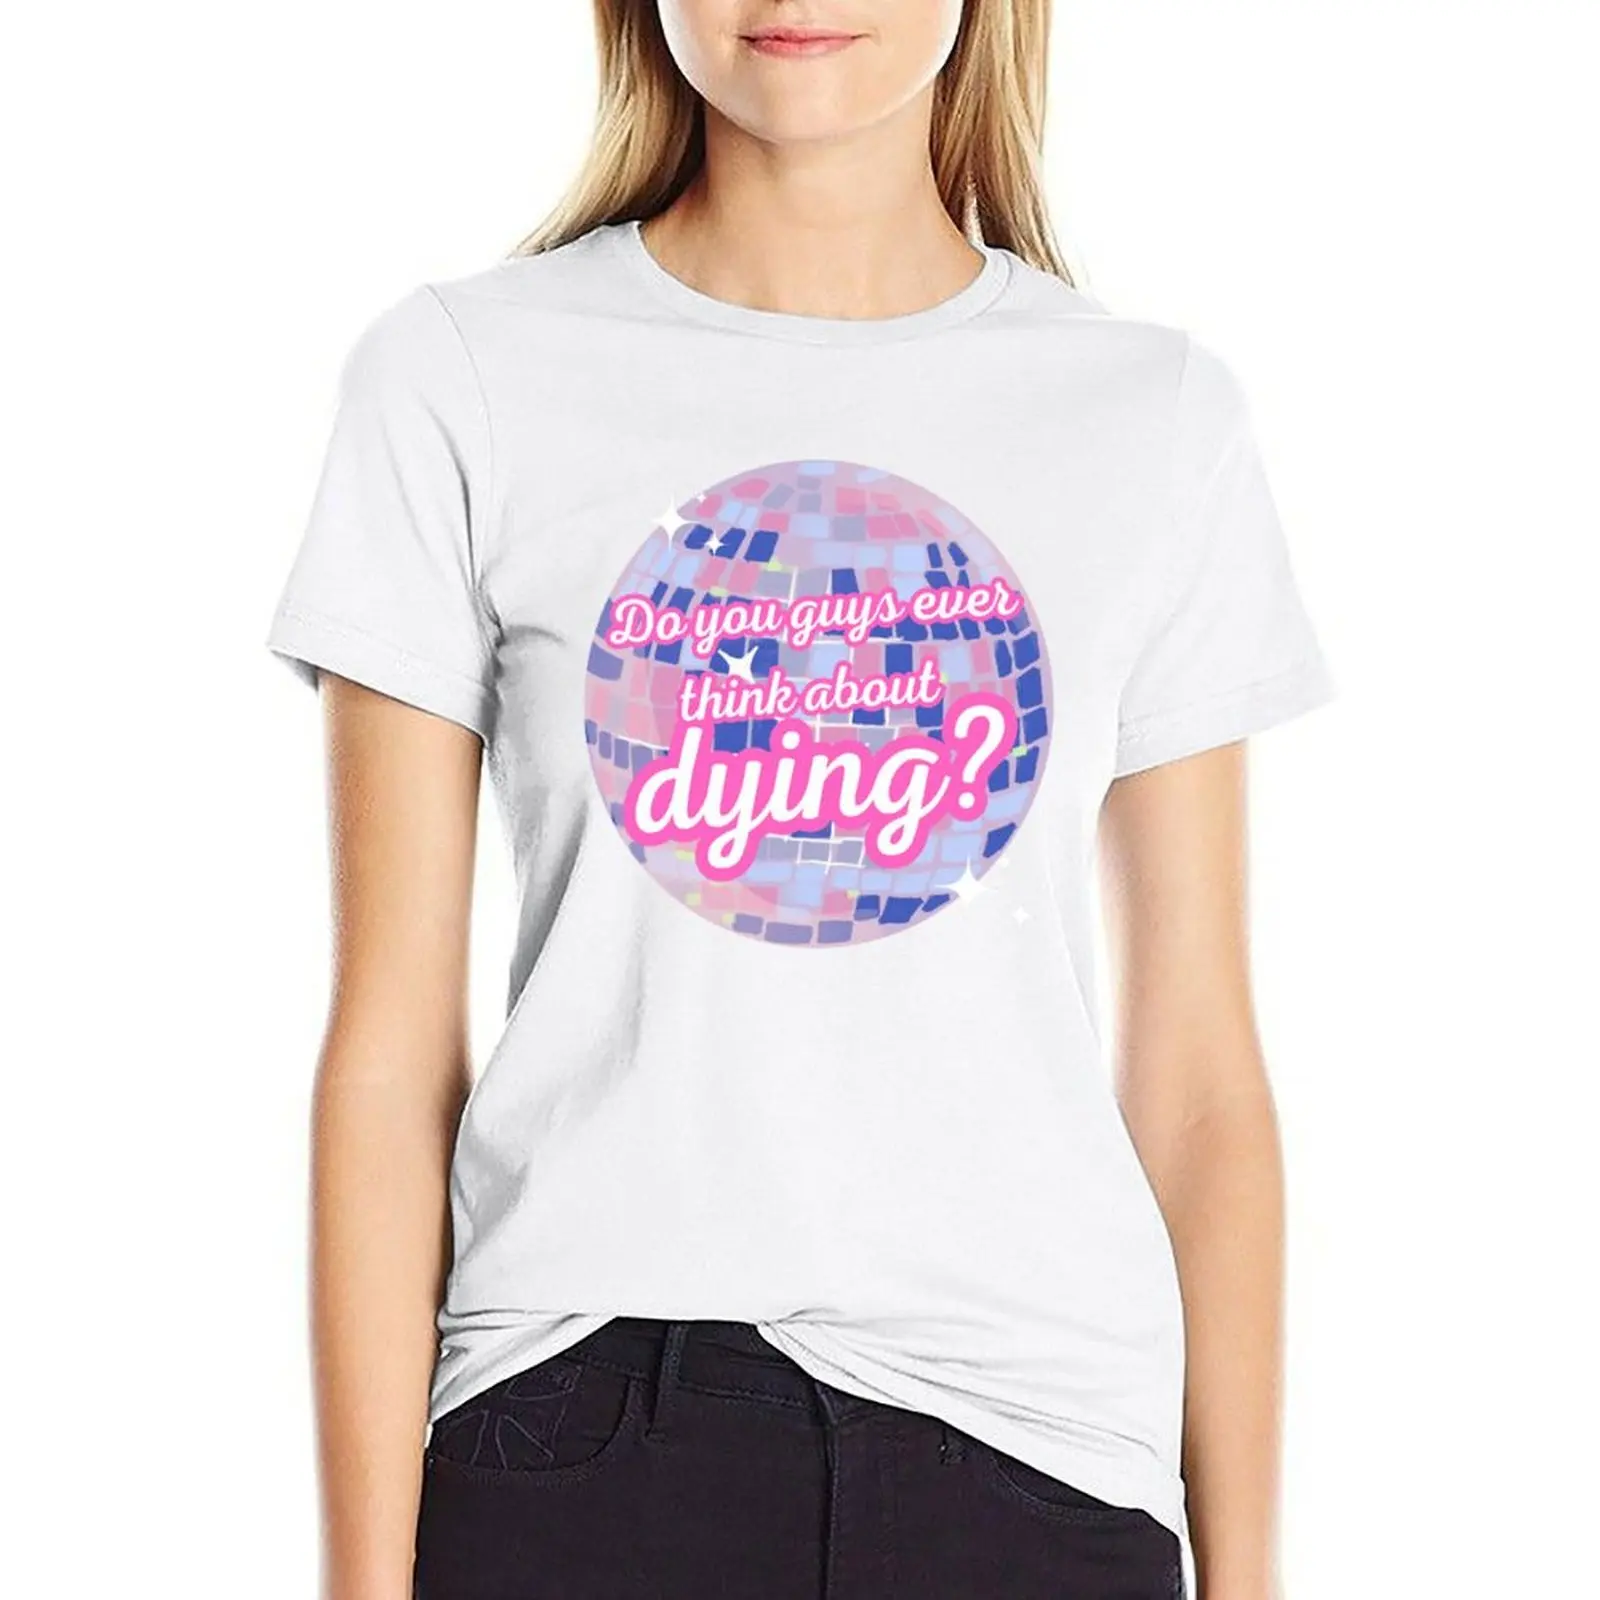 

Do you guys ever think about dying T-shirt funny summer top Aesthetic clothing fashion woman blouse 2024